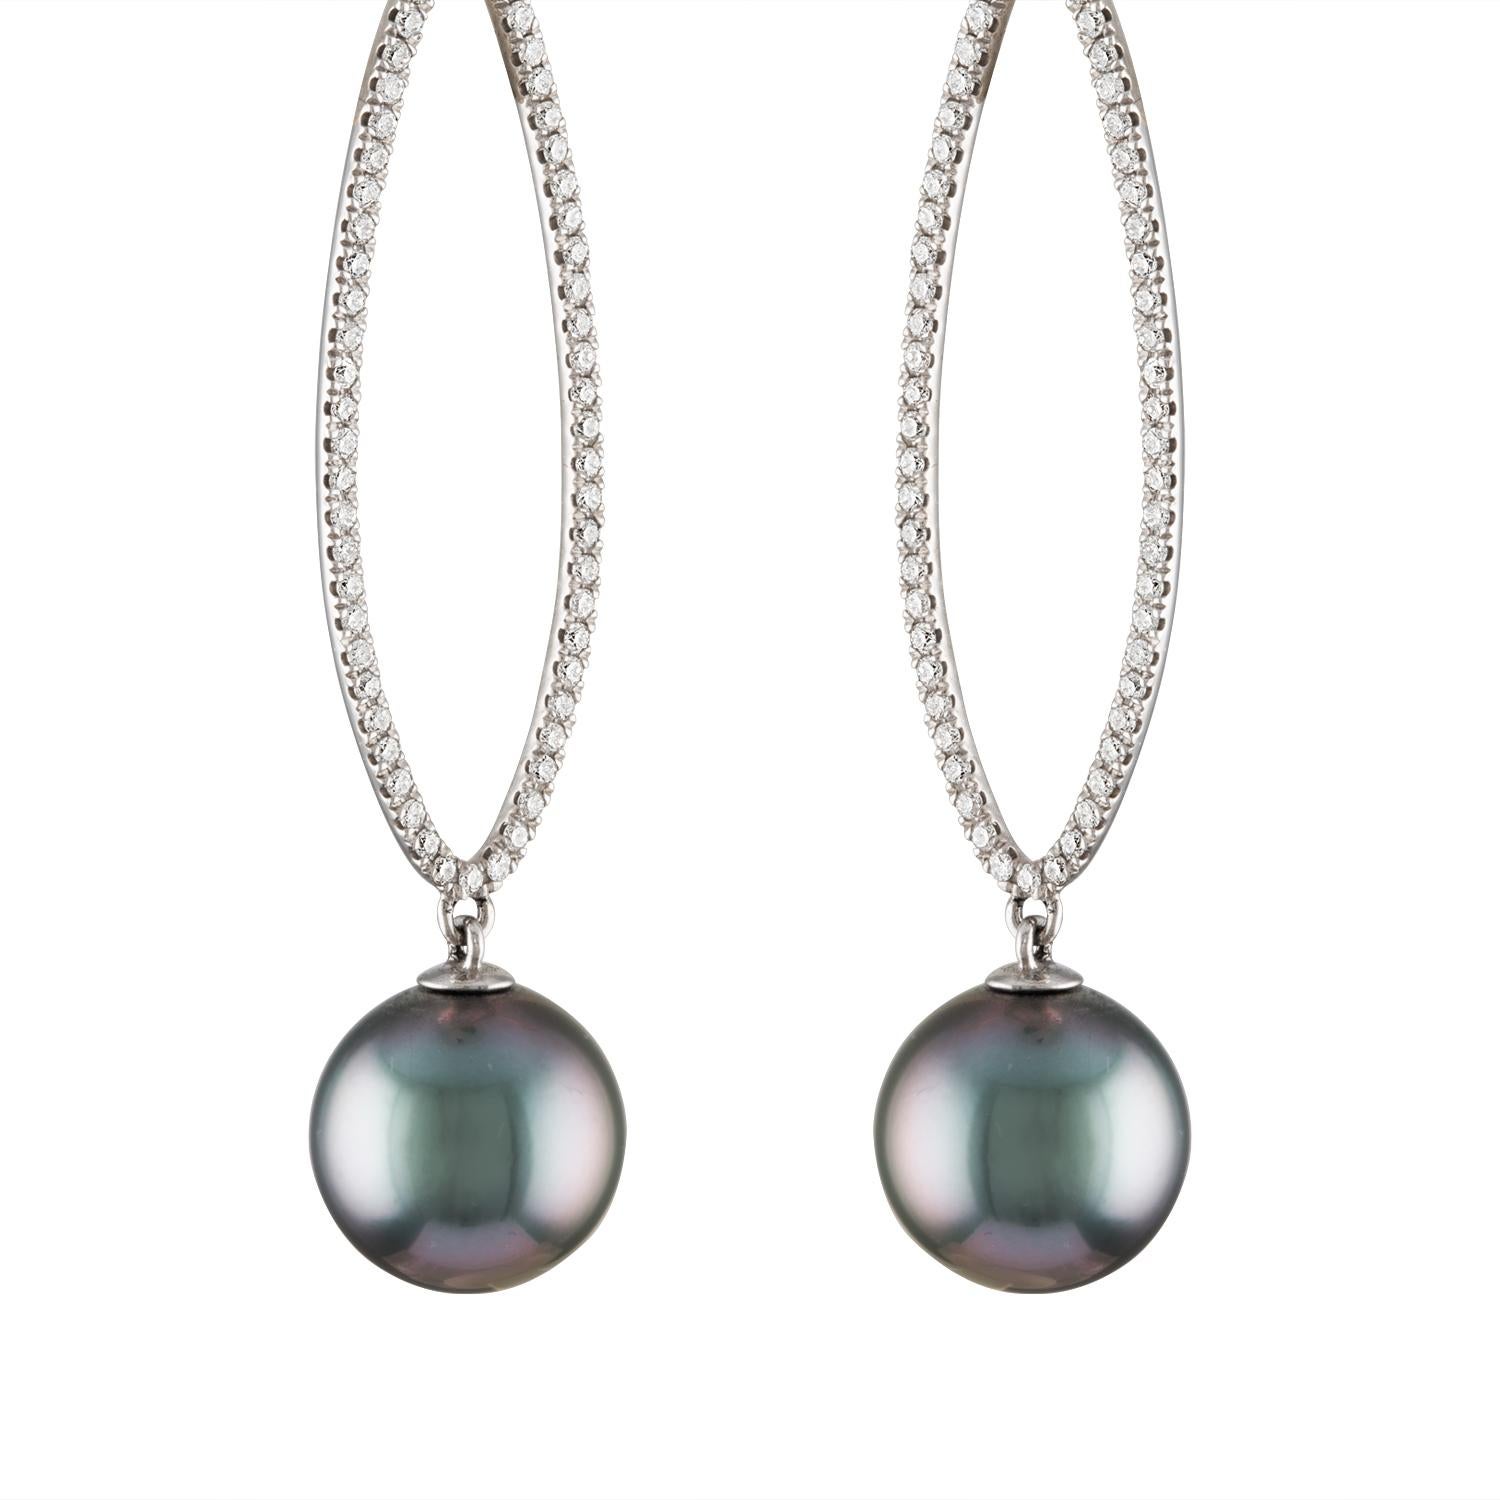 These South Sea Tahitian cultured pearl and diamond dangle earrings are set in 14K white gold with perfectly round, spotless 12.5mm pearls and .87 total carats of diamonds.
These pearls feature peacock overtones, high luster and very clean